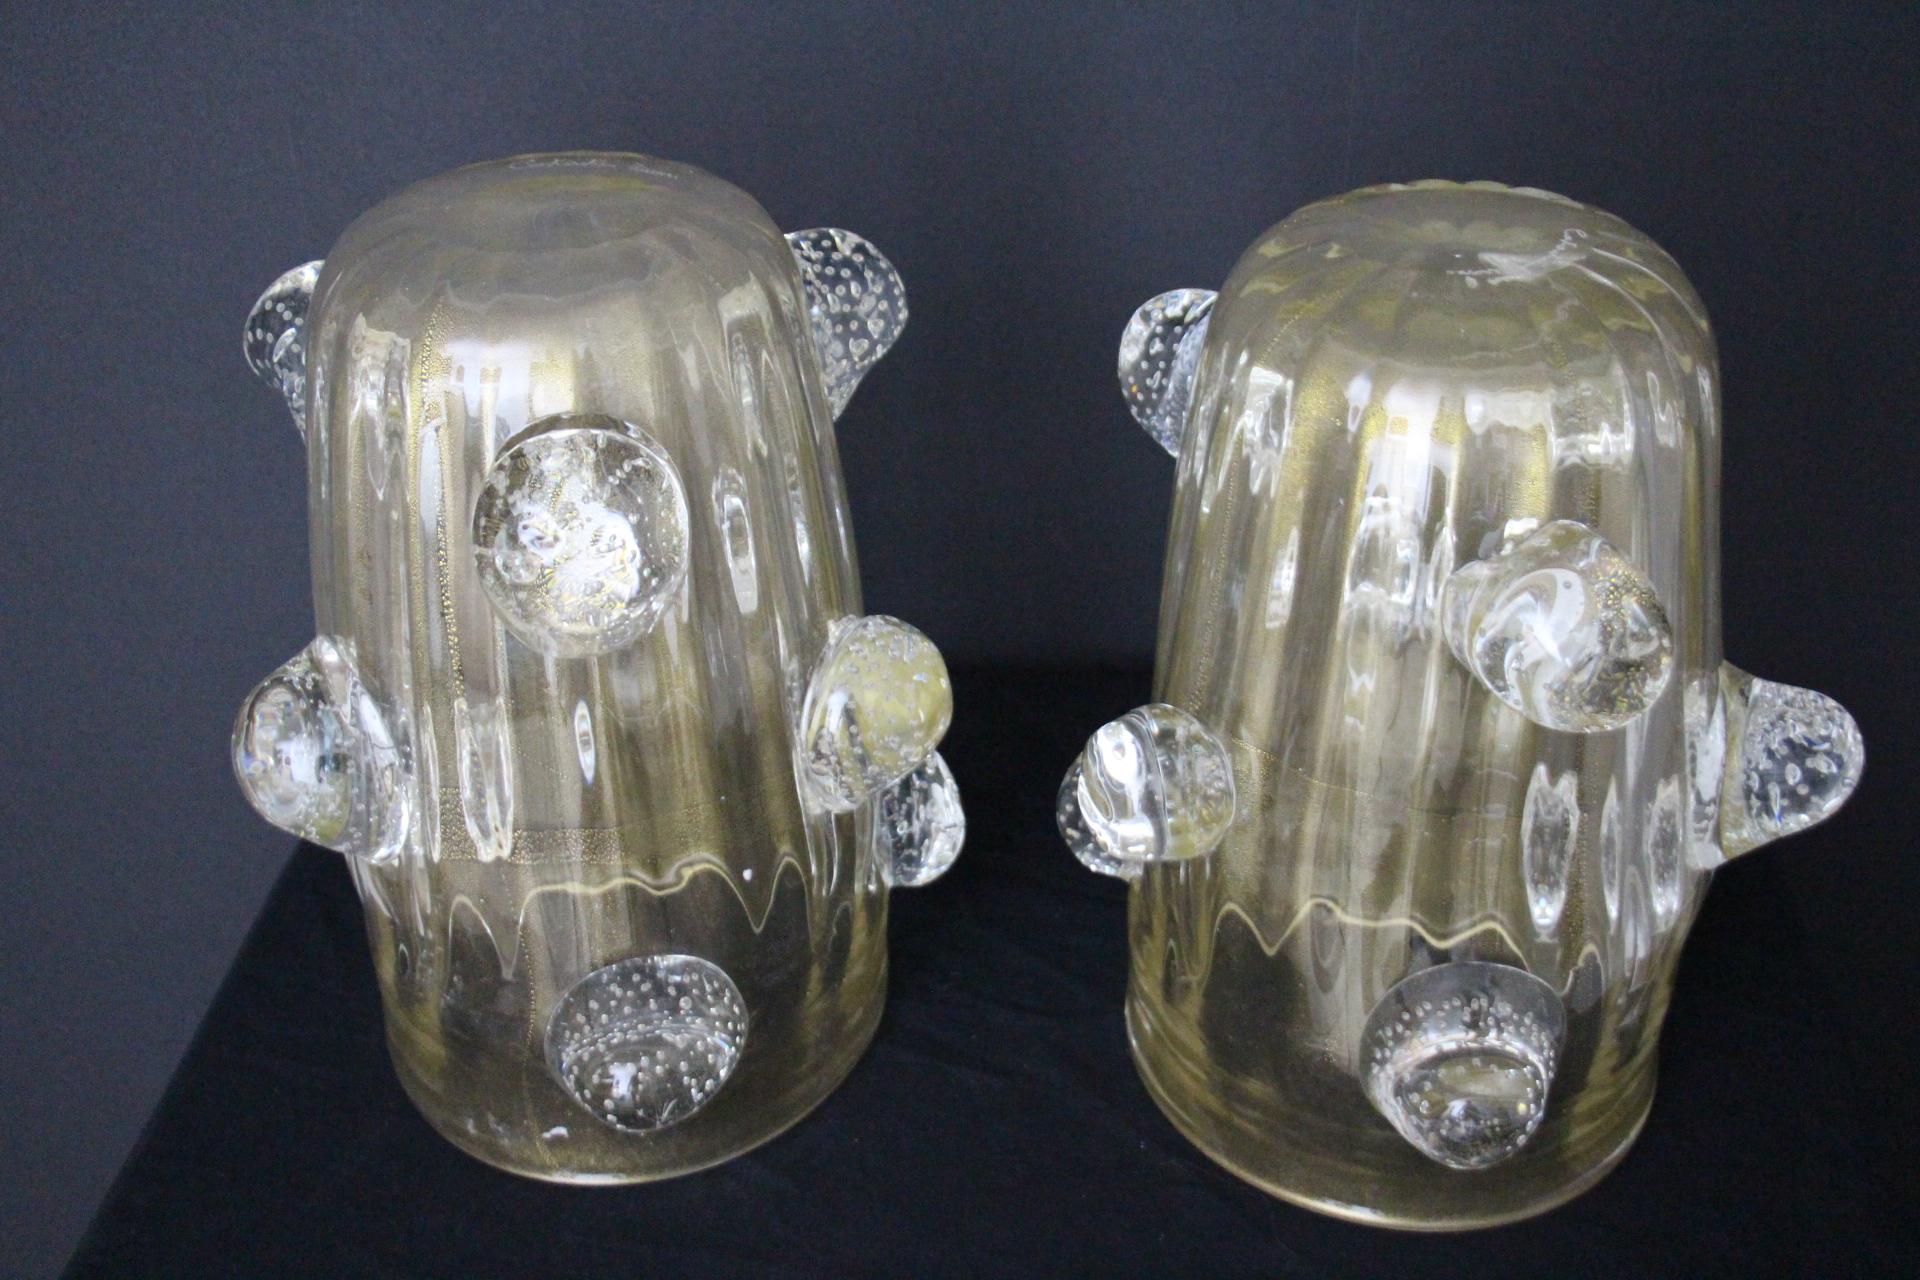 Pair of Large Golden Murano Glass Vases With Bubbles Balls Decor by Costantini For Sale 1